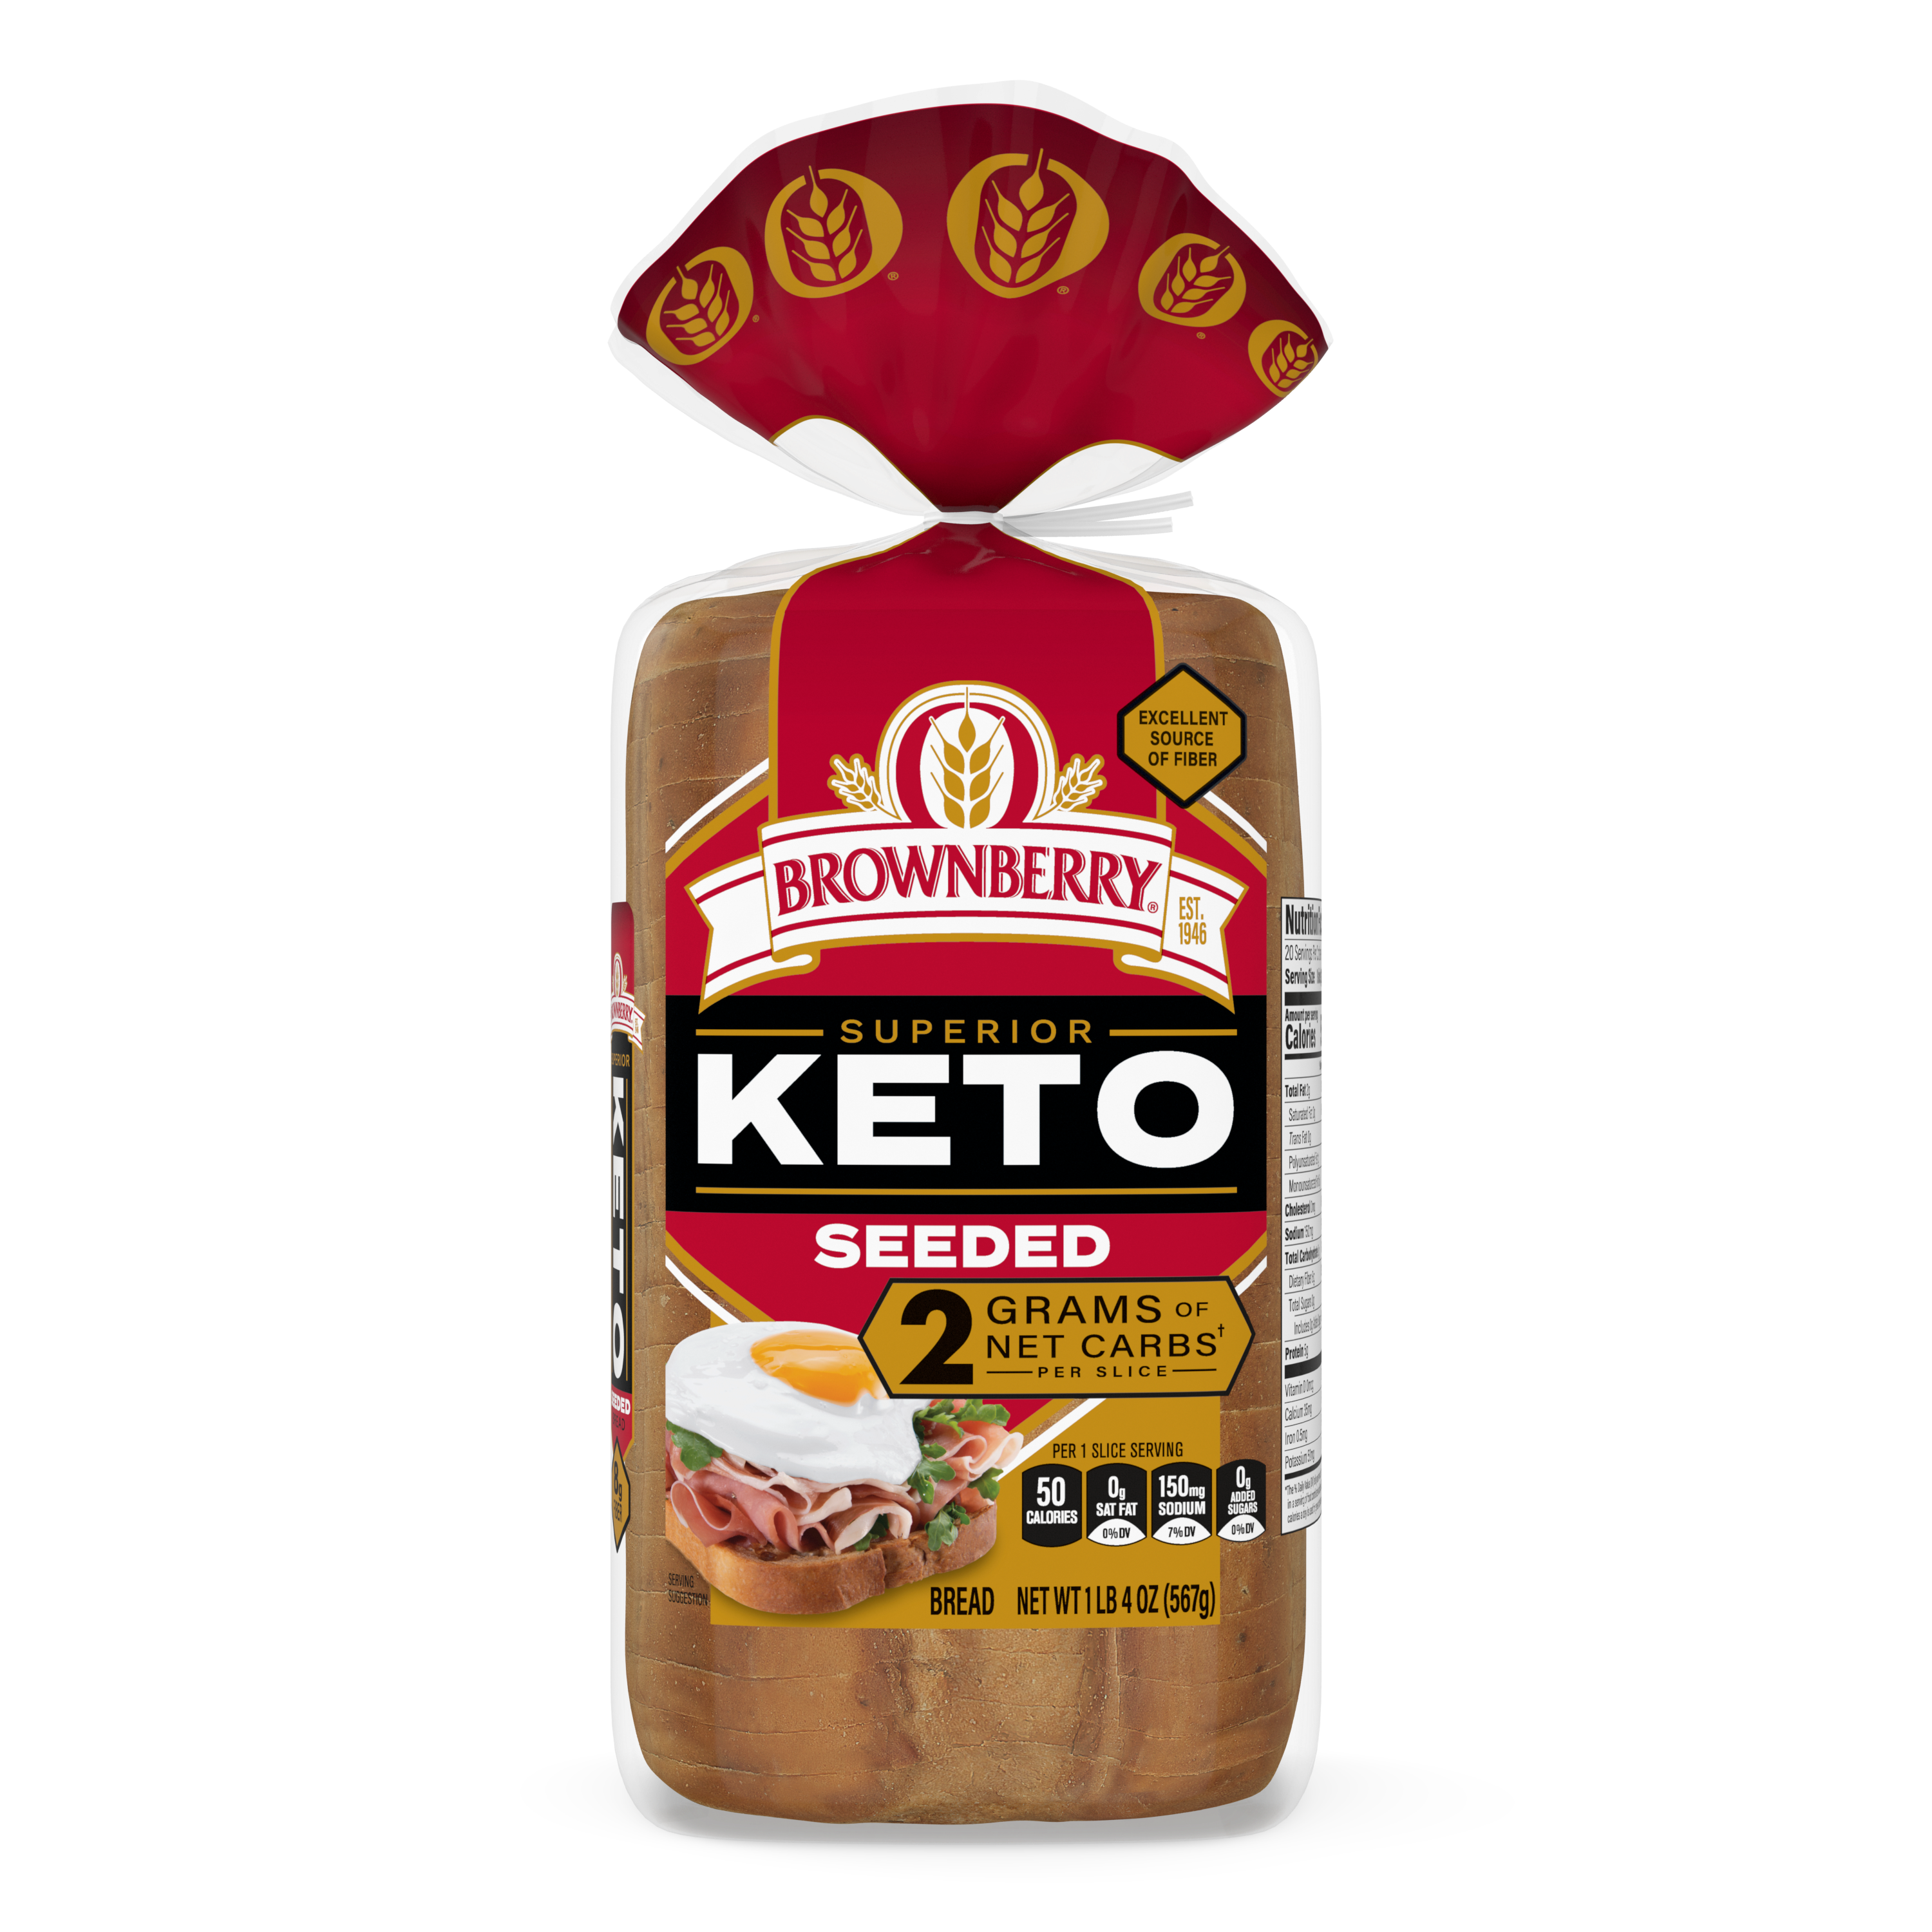 Brownberry Keto Seeded Pack Shot